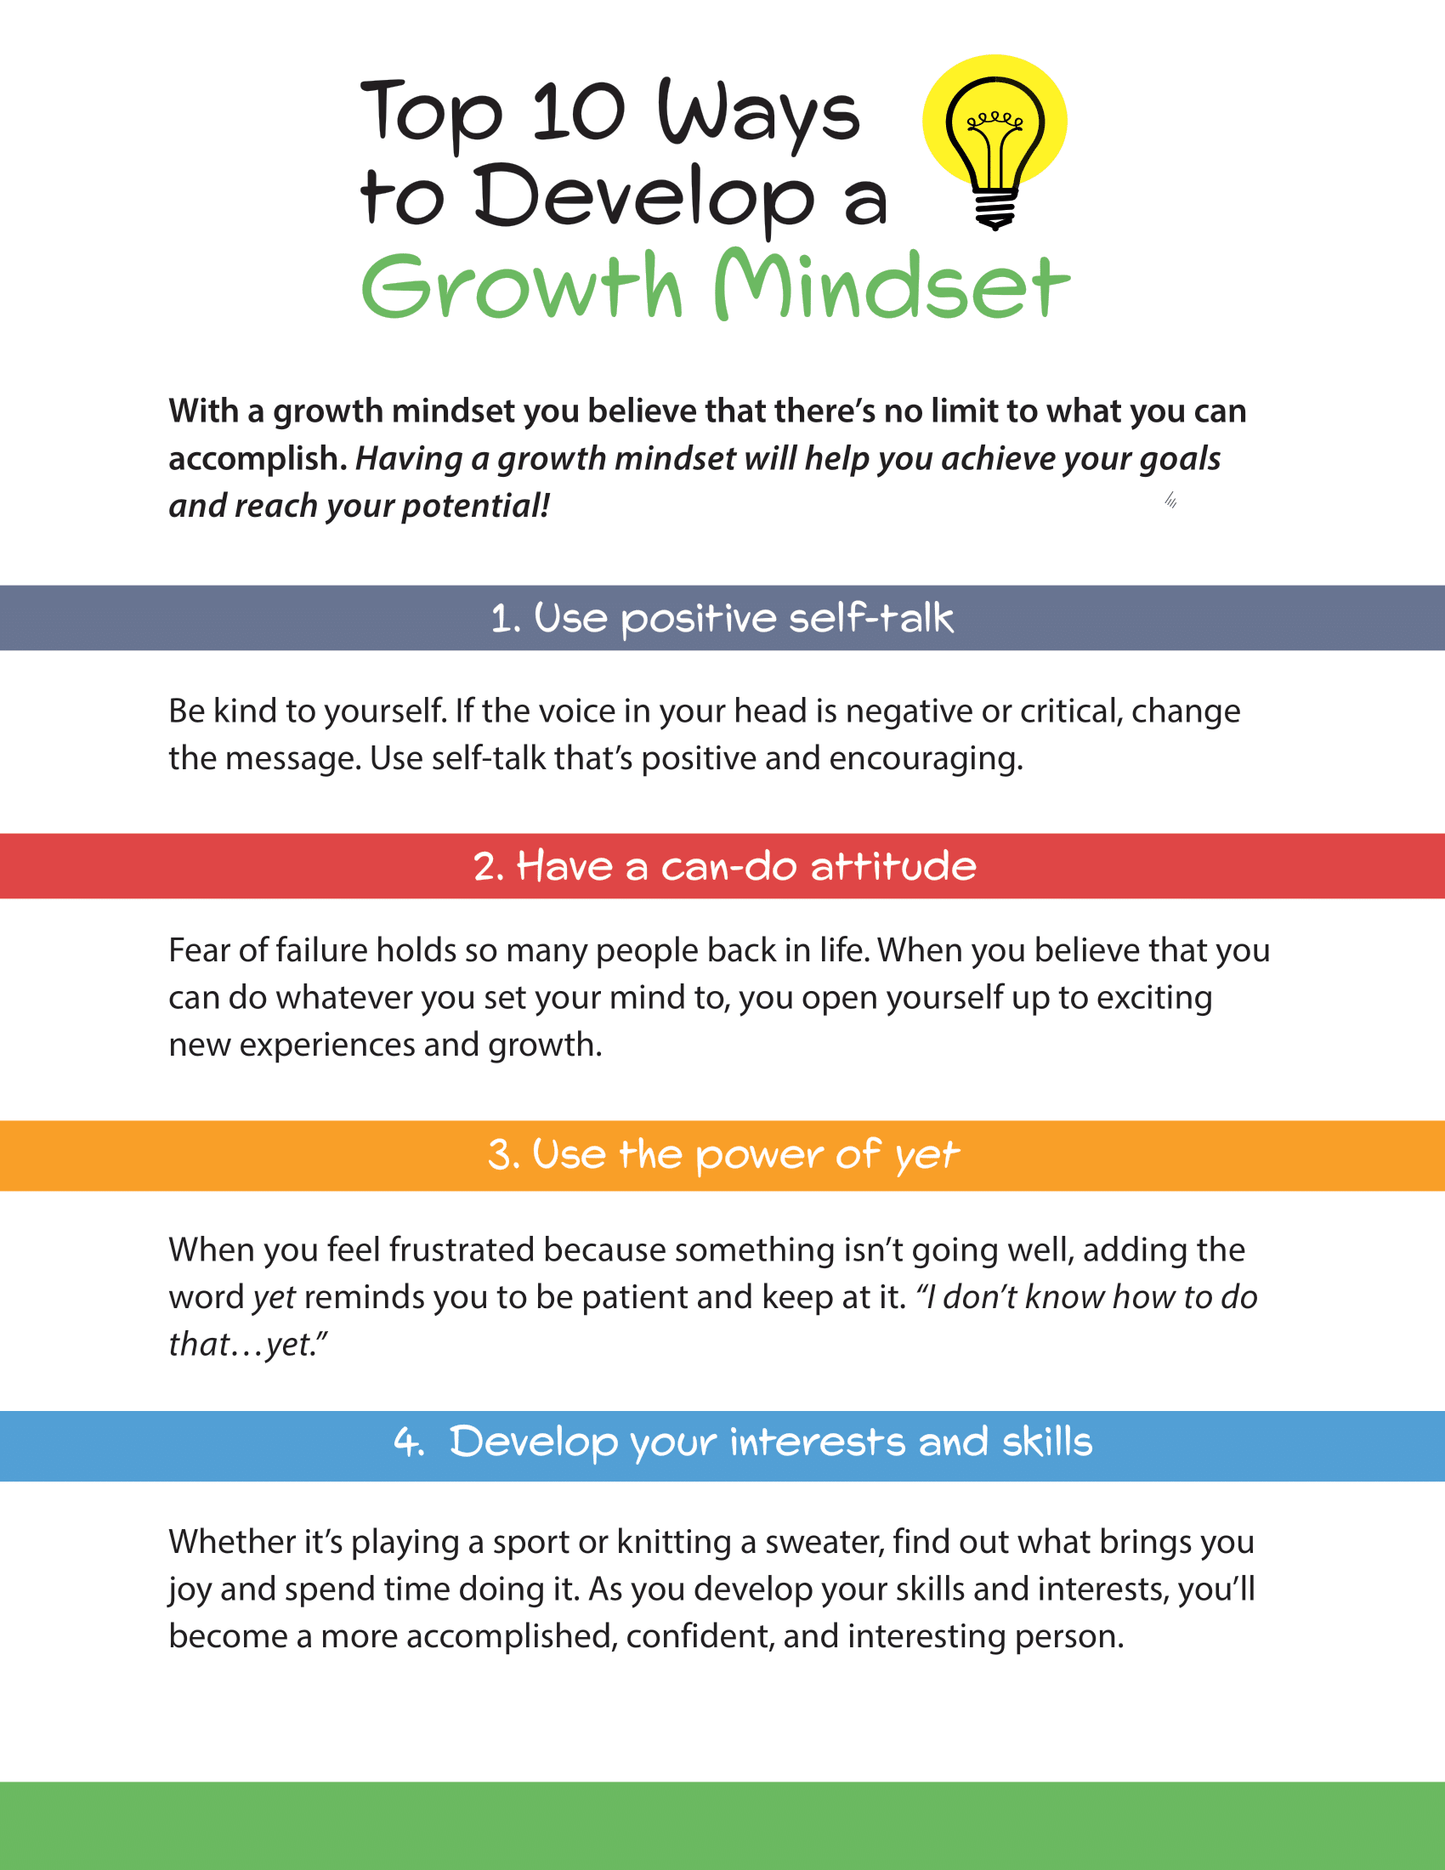 Top 10 Ways to Develop a Growth Mindset